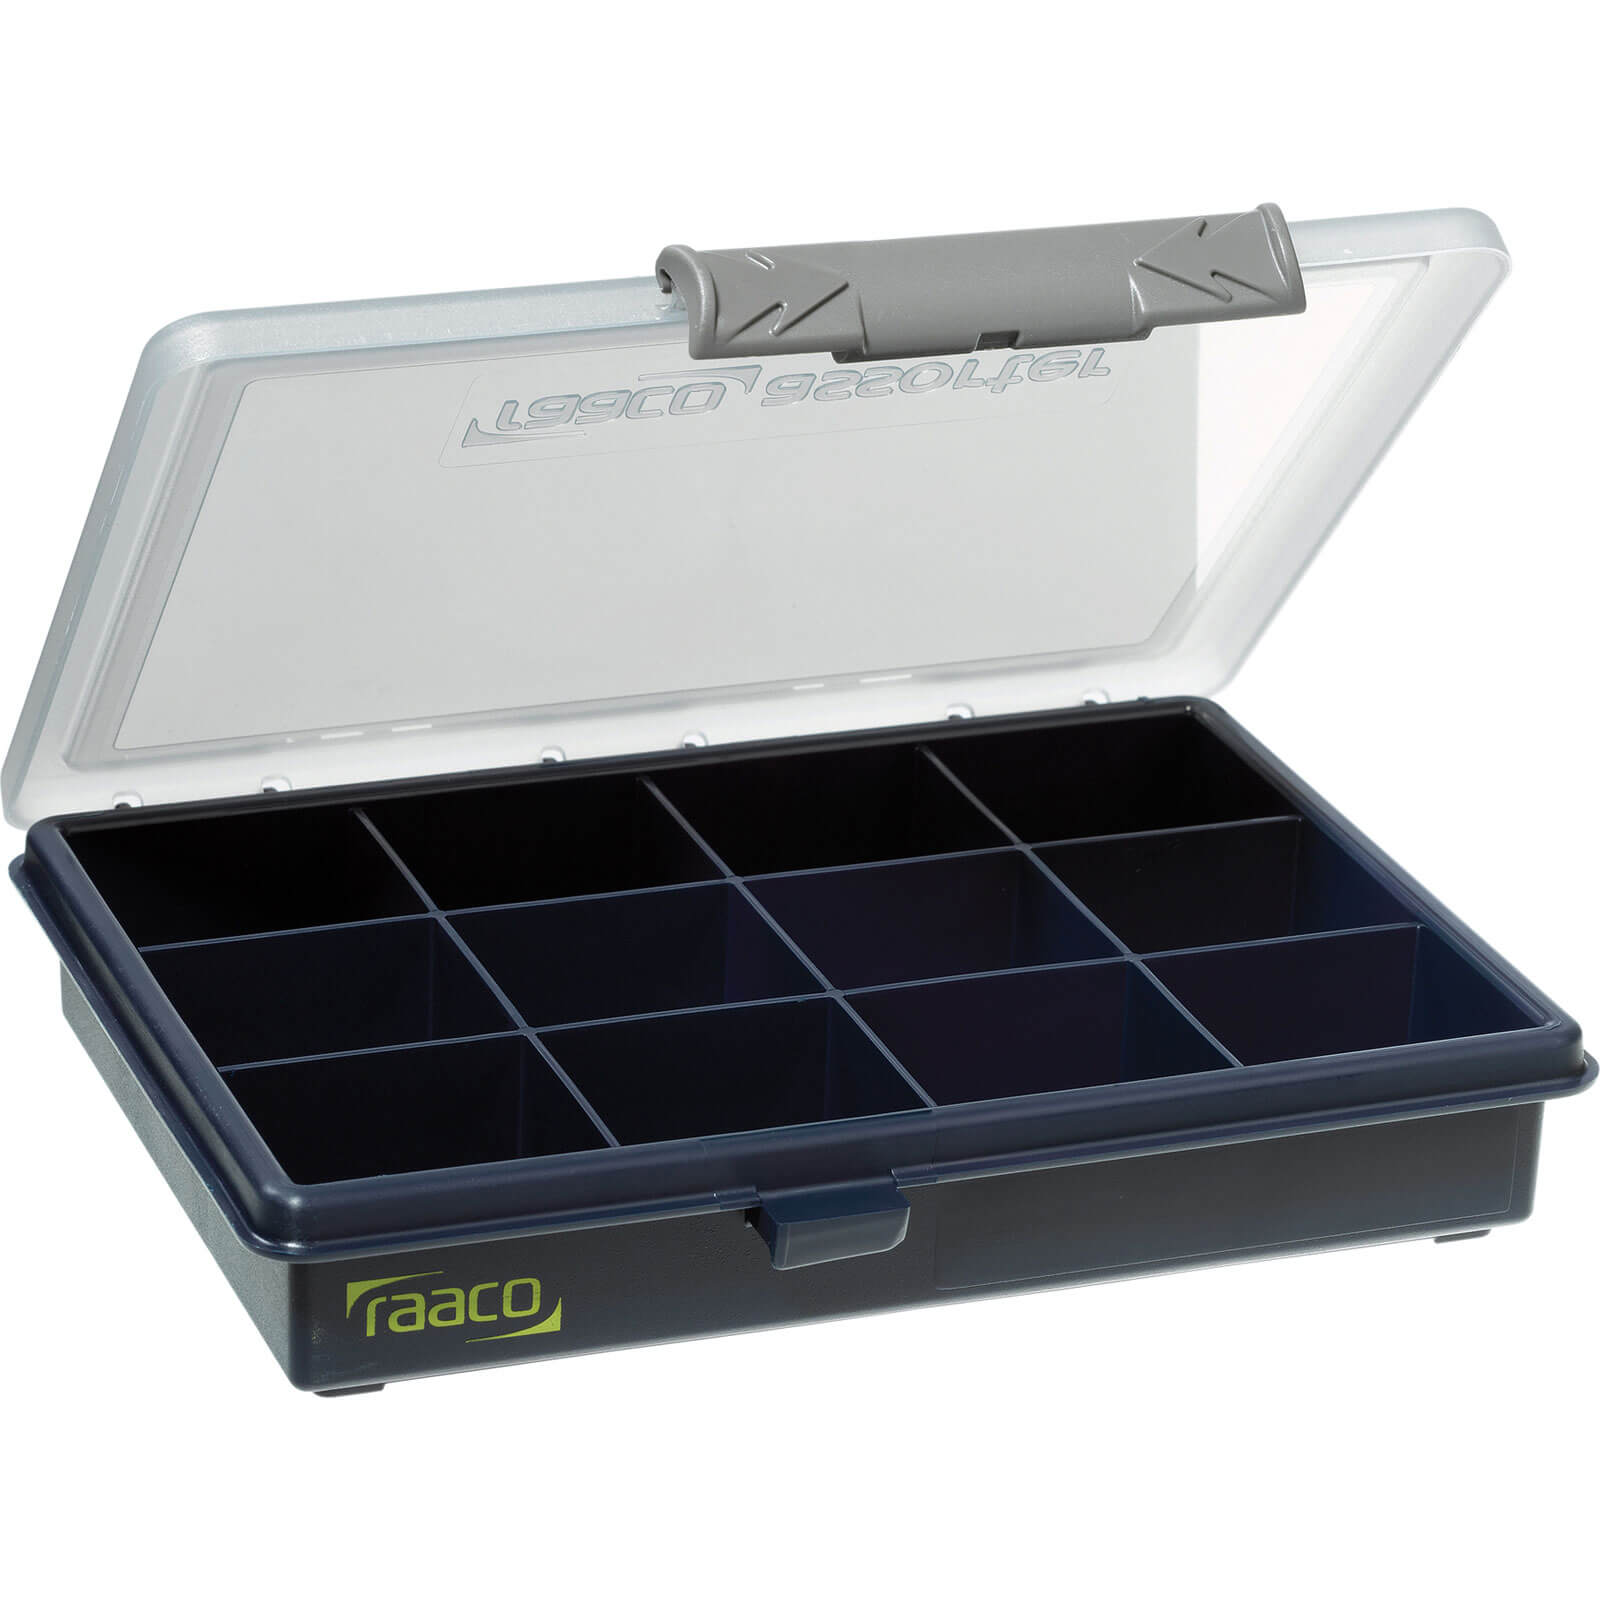 Image of Raaco 12 Compartment A6 Organiser Case